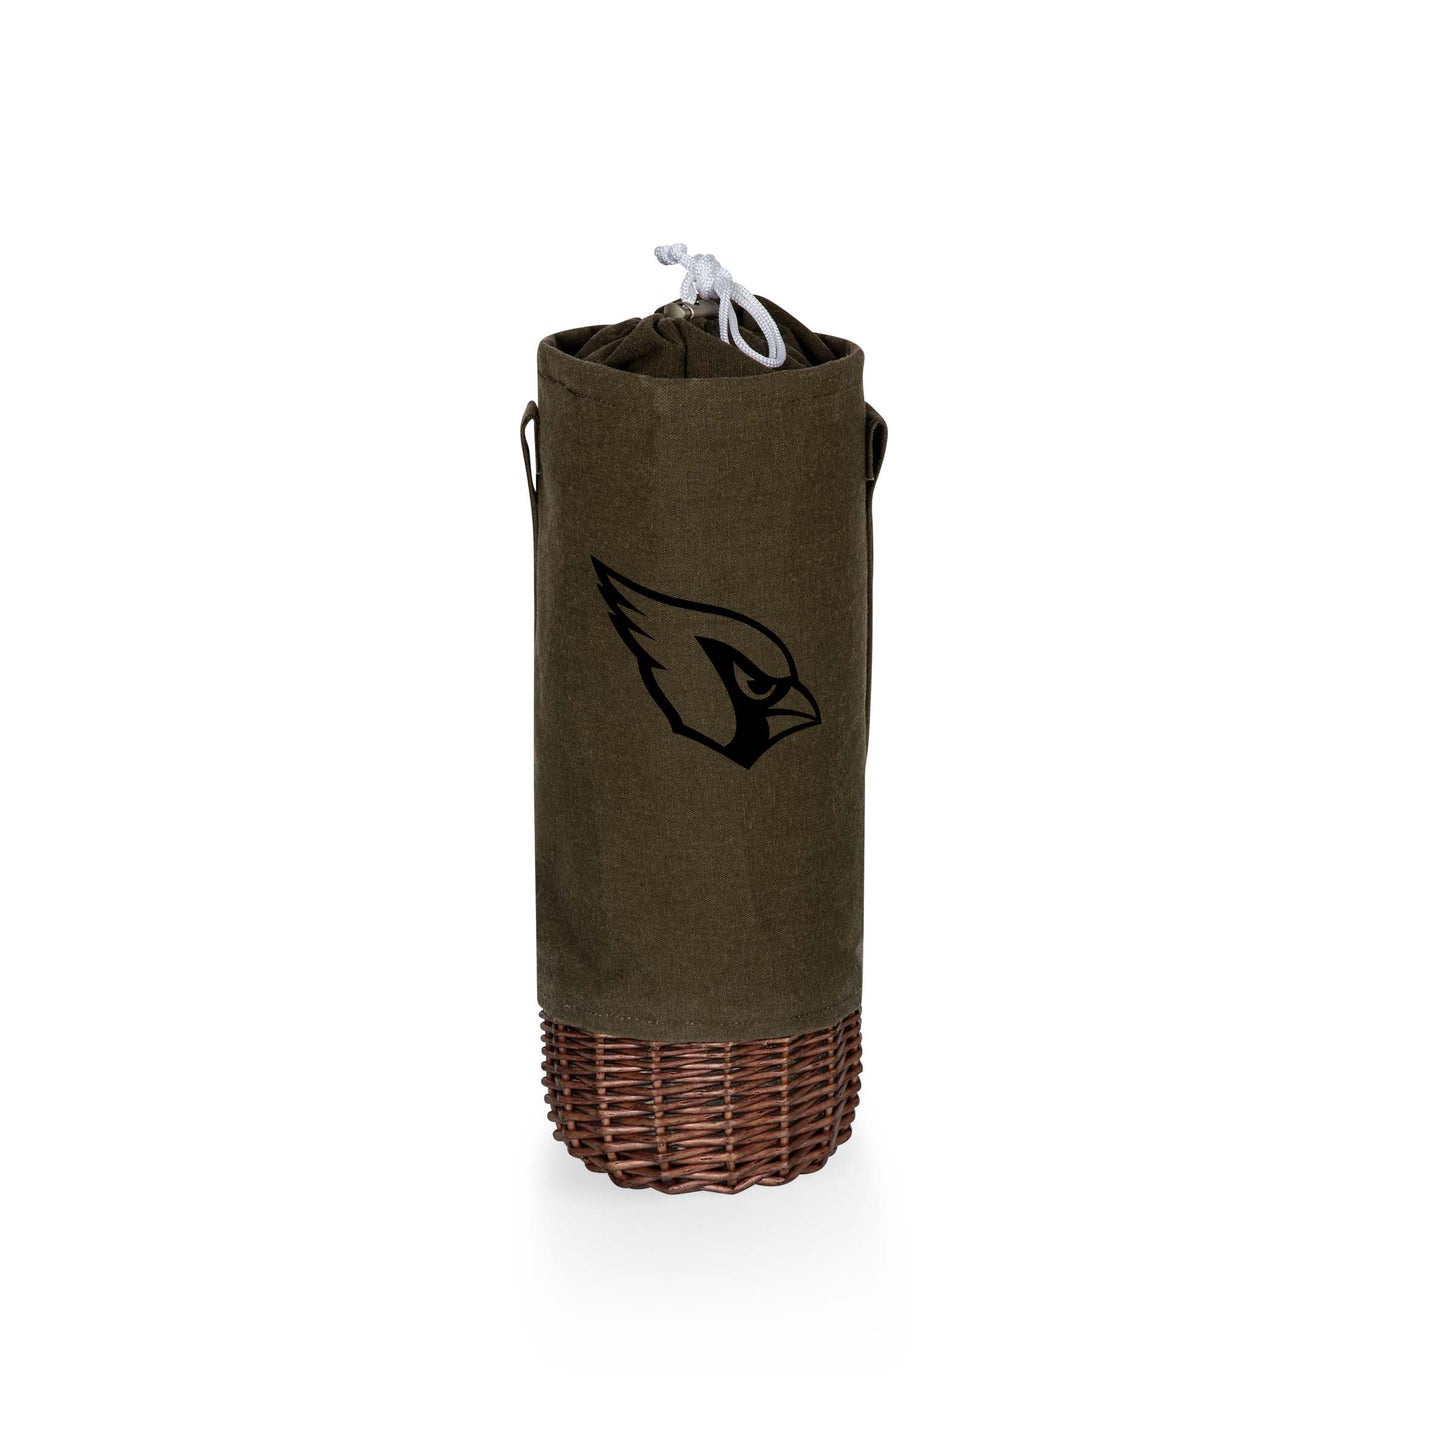 Arizona Cardinals - Malbec Insulated Canvas and Willow Wine Bottle Basket